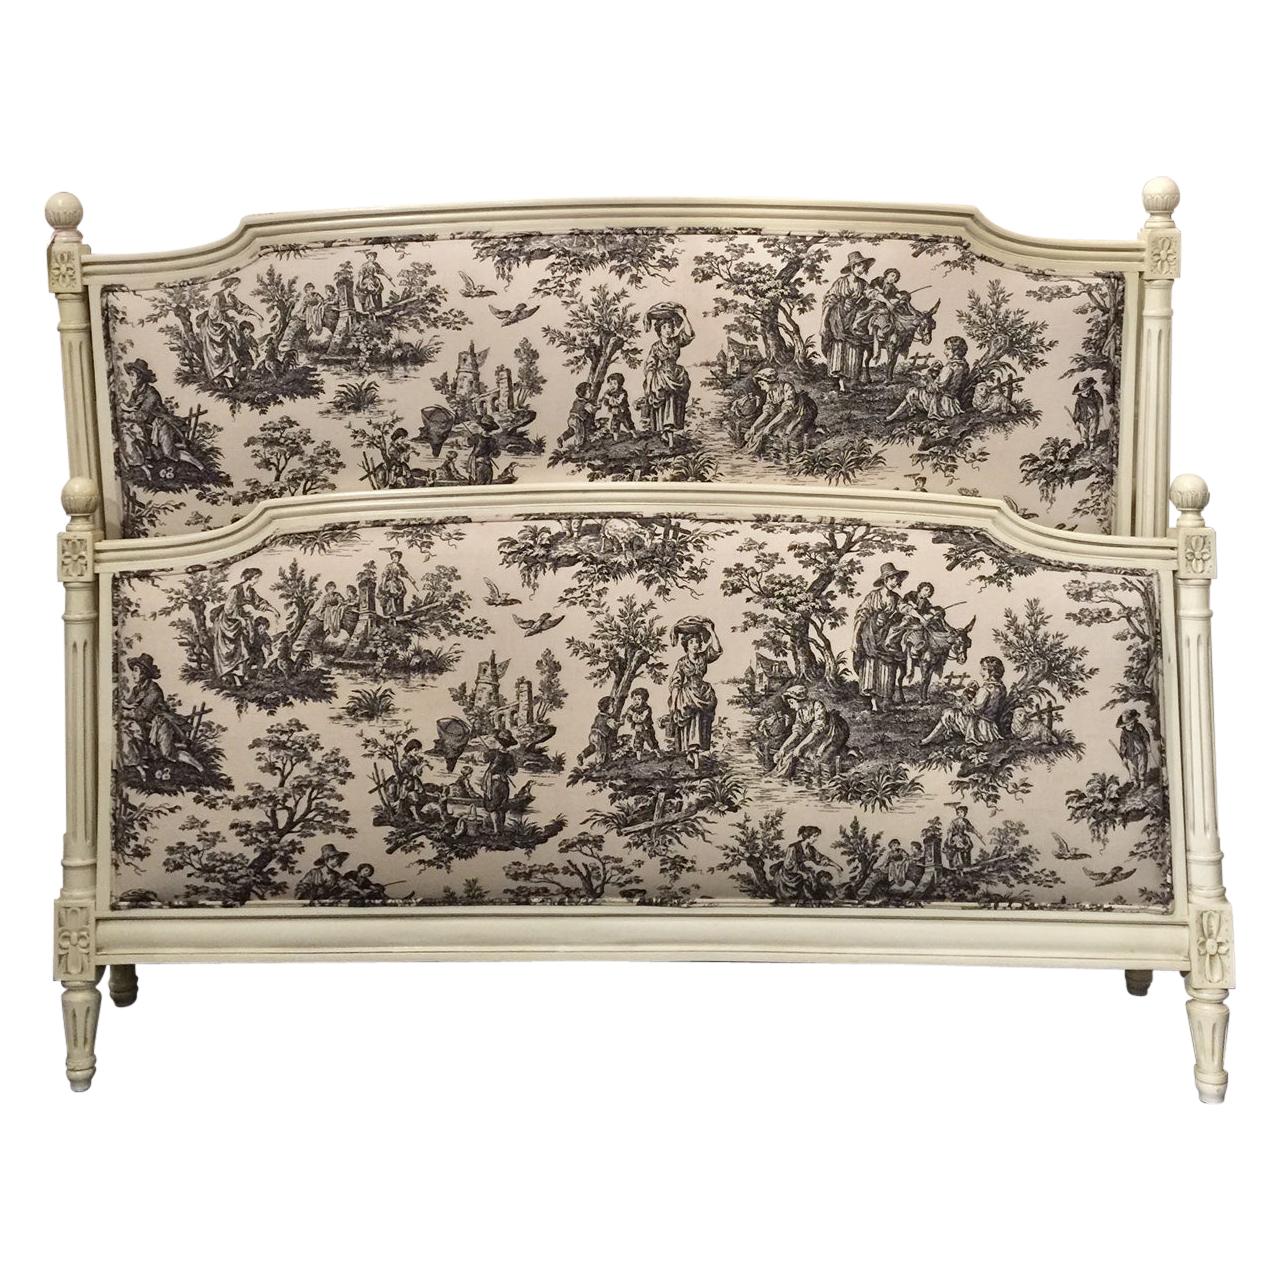 French Upholstered Double Bed Frame, Style Louis XVI, Toile de Jouy